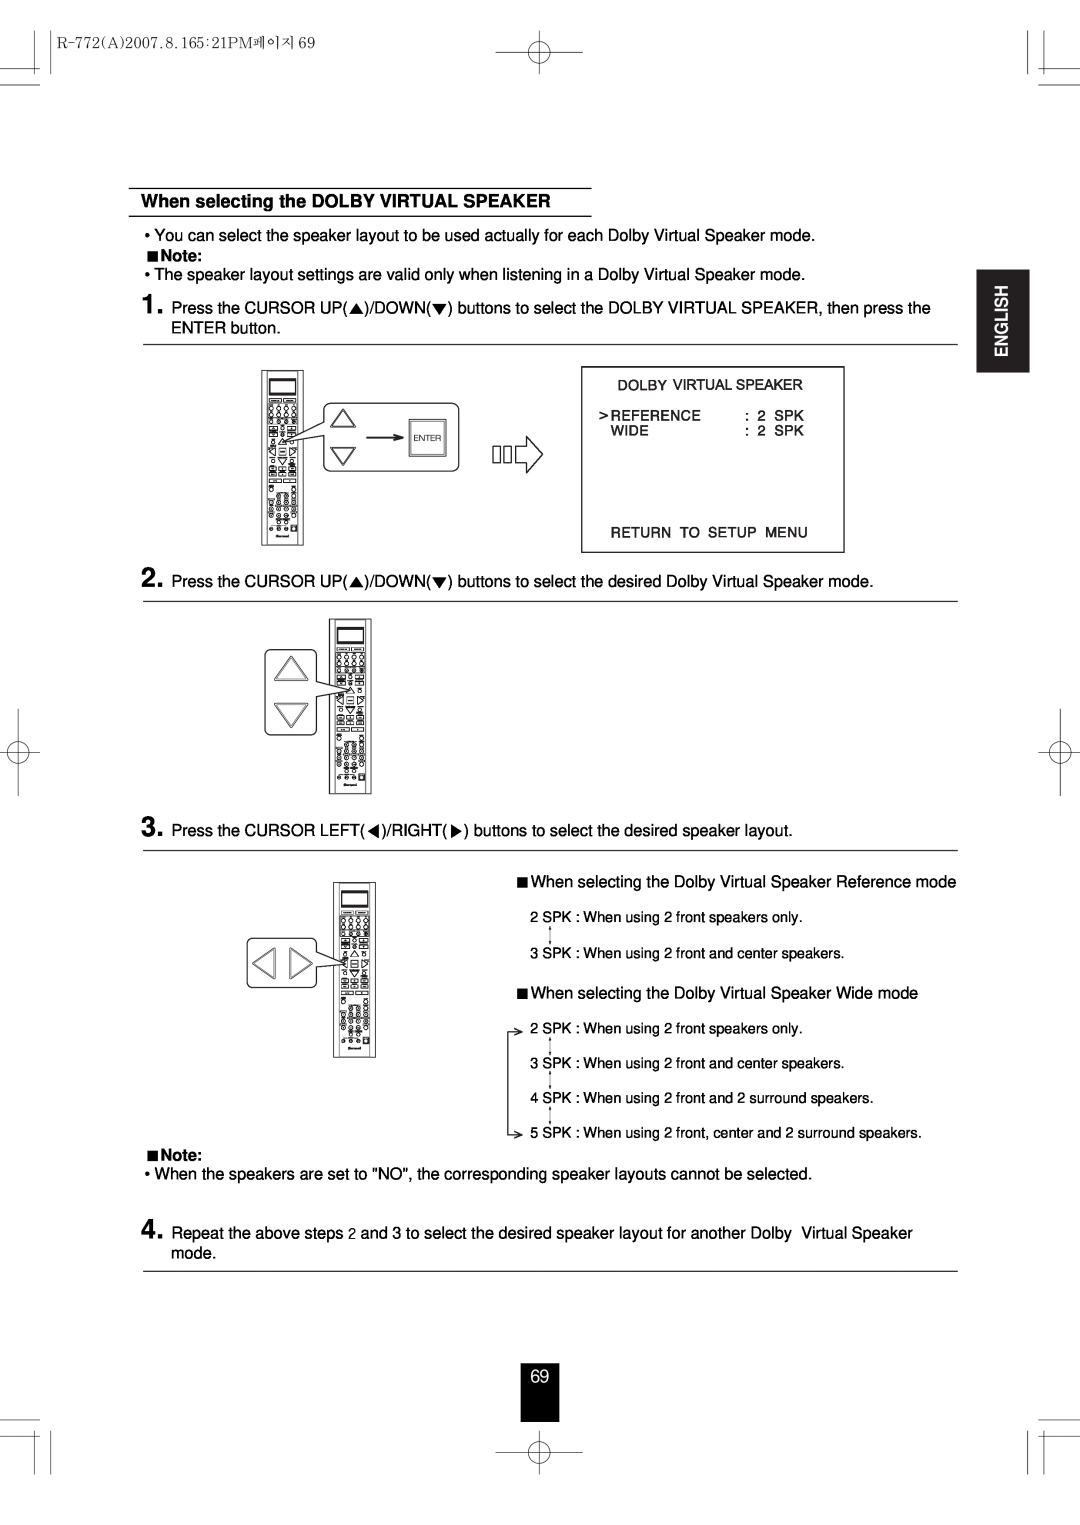 Sherwood R-772 manual When selecting the DOLBY VIRTUAL SPEAKER, English, SPK : When using 2 front speakers only 